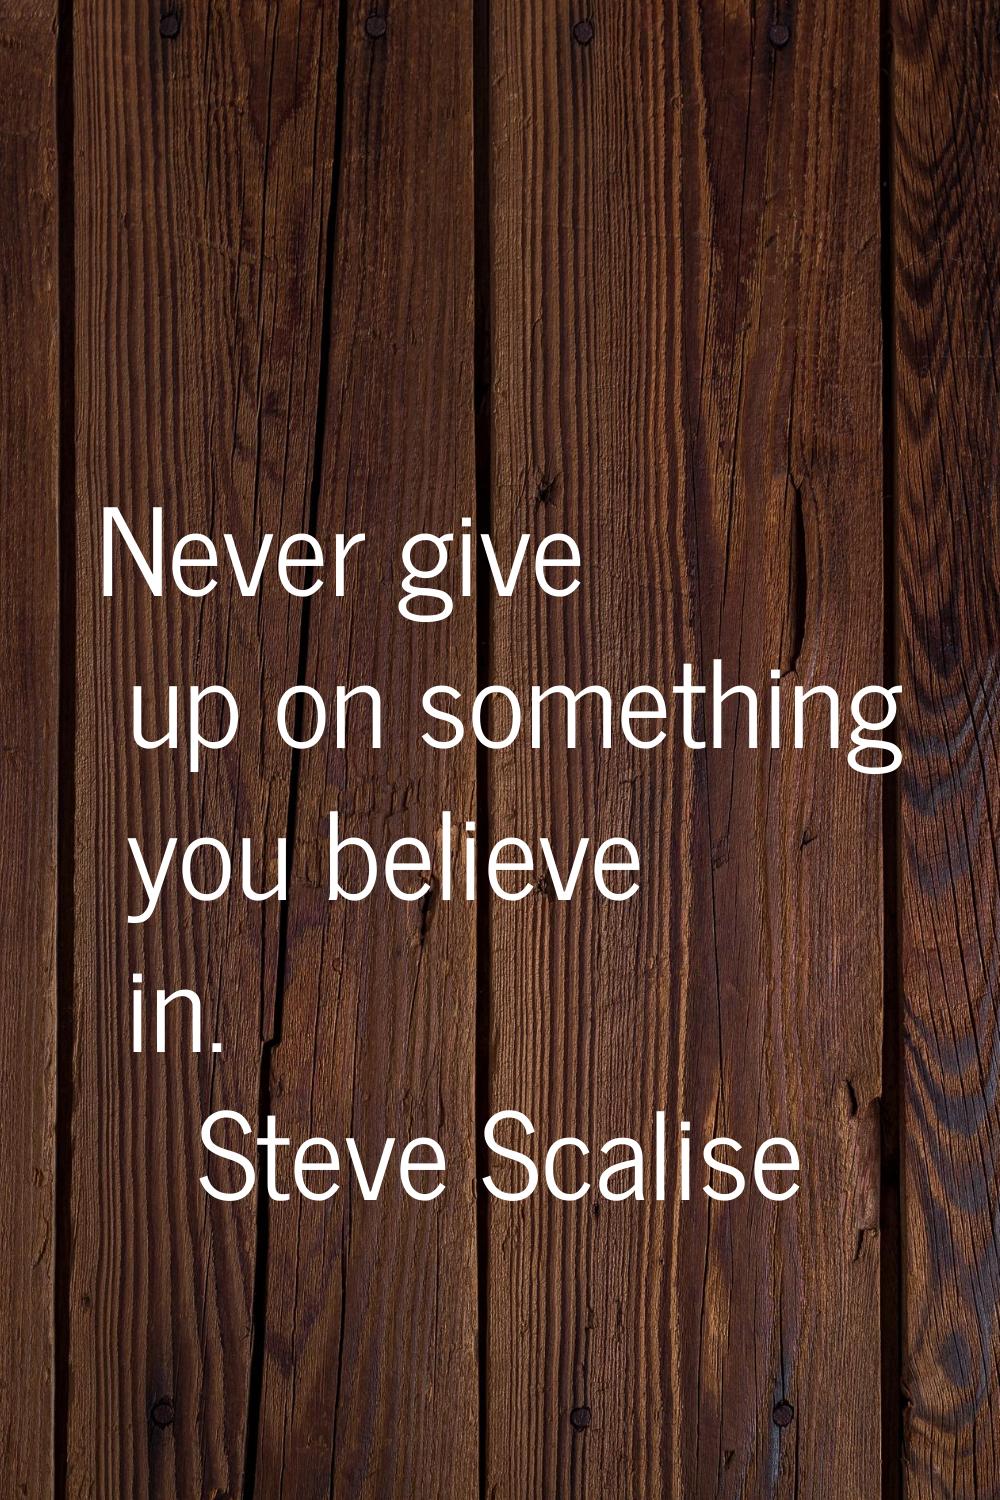 Never give up on something you believe in.